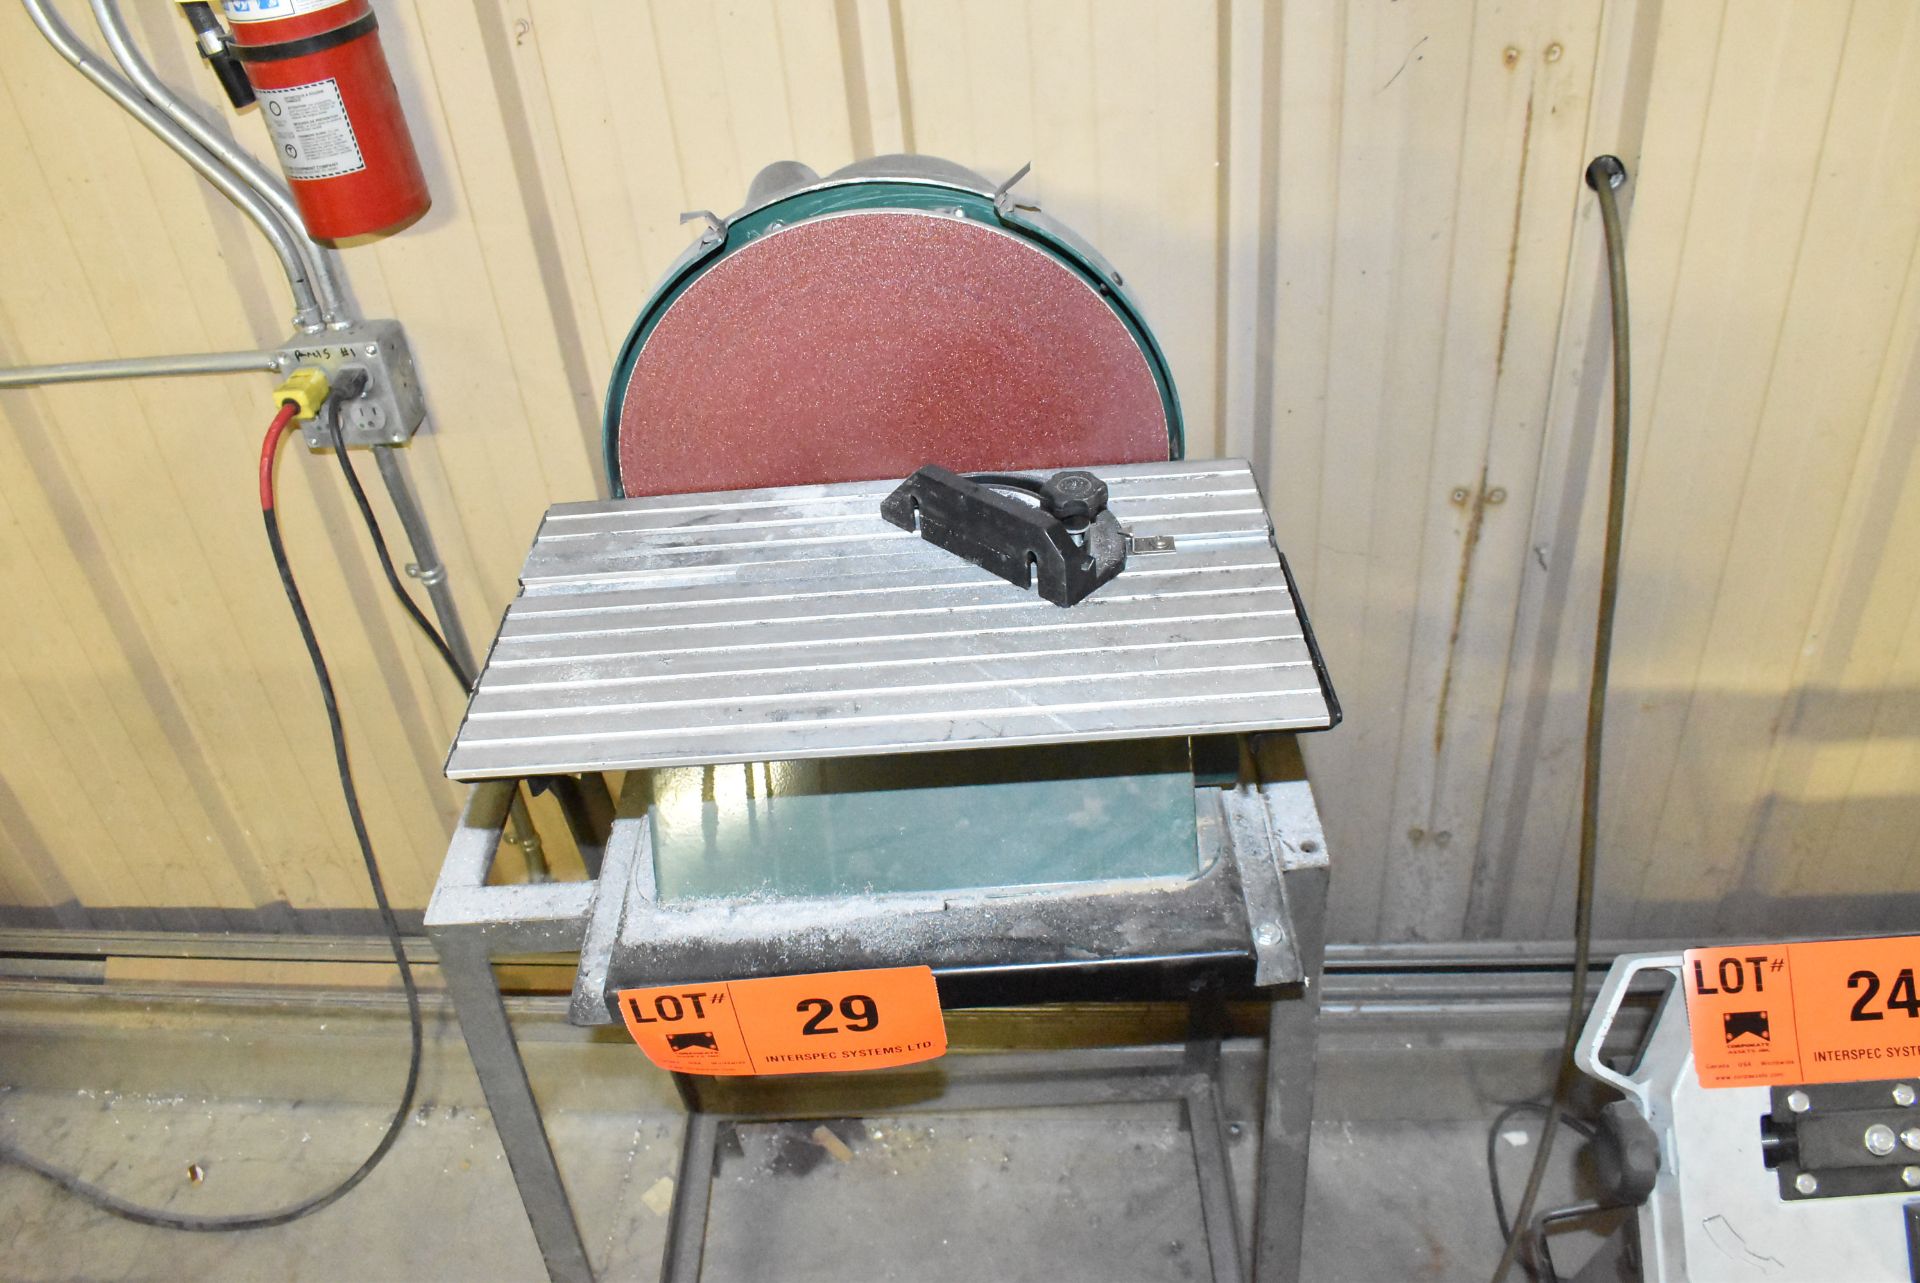 CRAFTEX 12" DISC SANDER, S/N A022236 [RIGGING FOR FOR LOT #29 - $25 CAD PLUS APPLICABLE TAXES] - Image 5 of 5